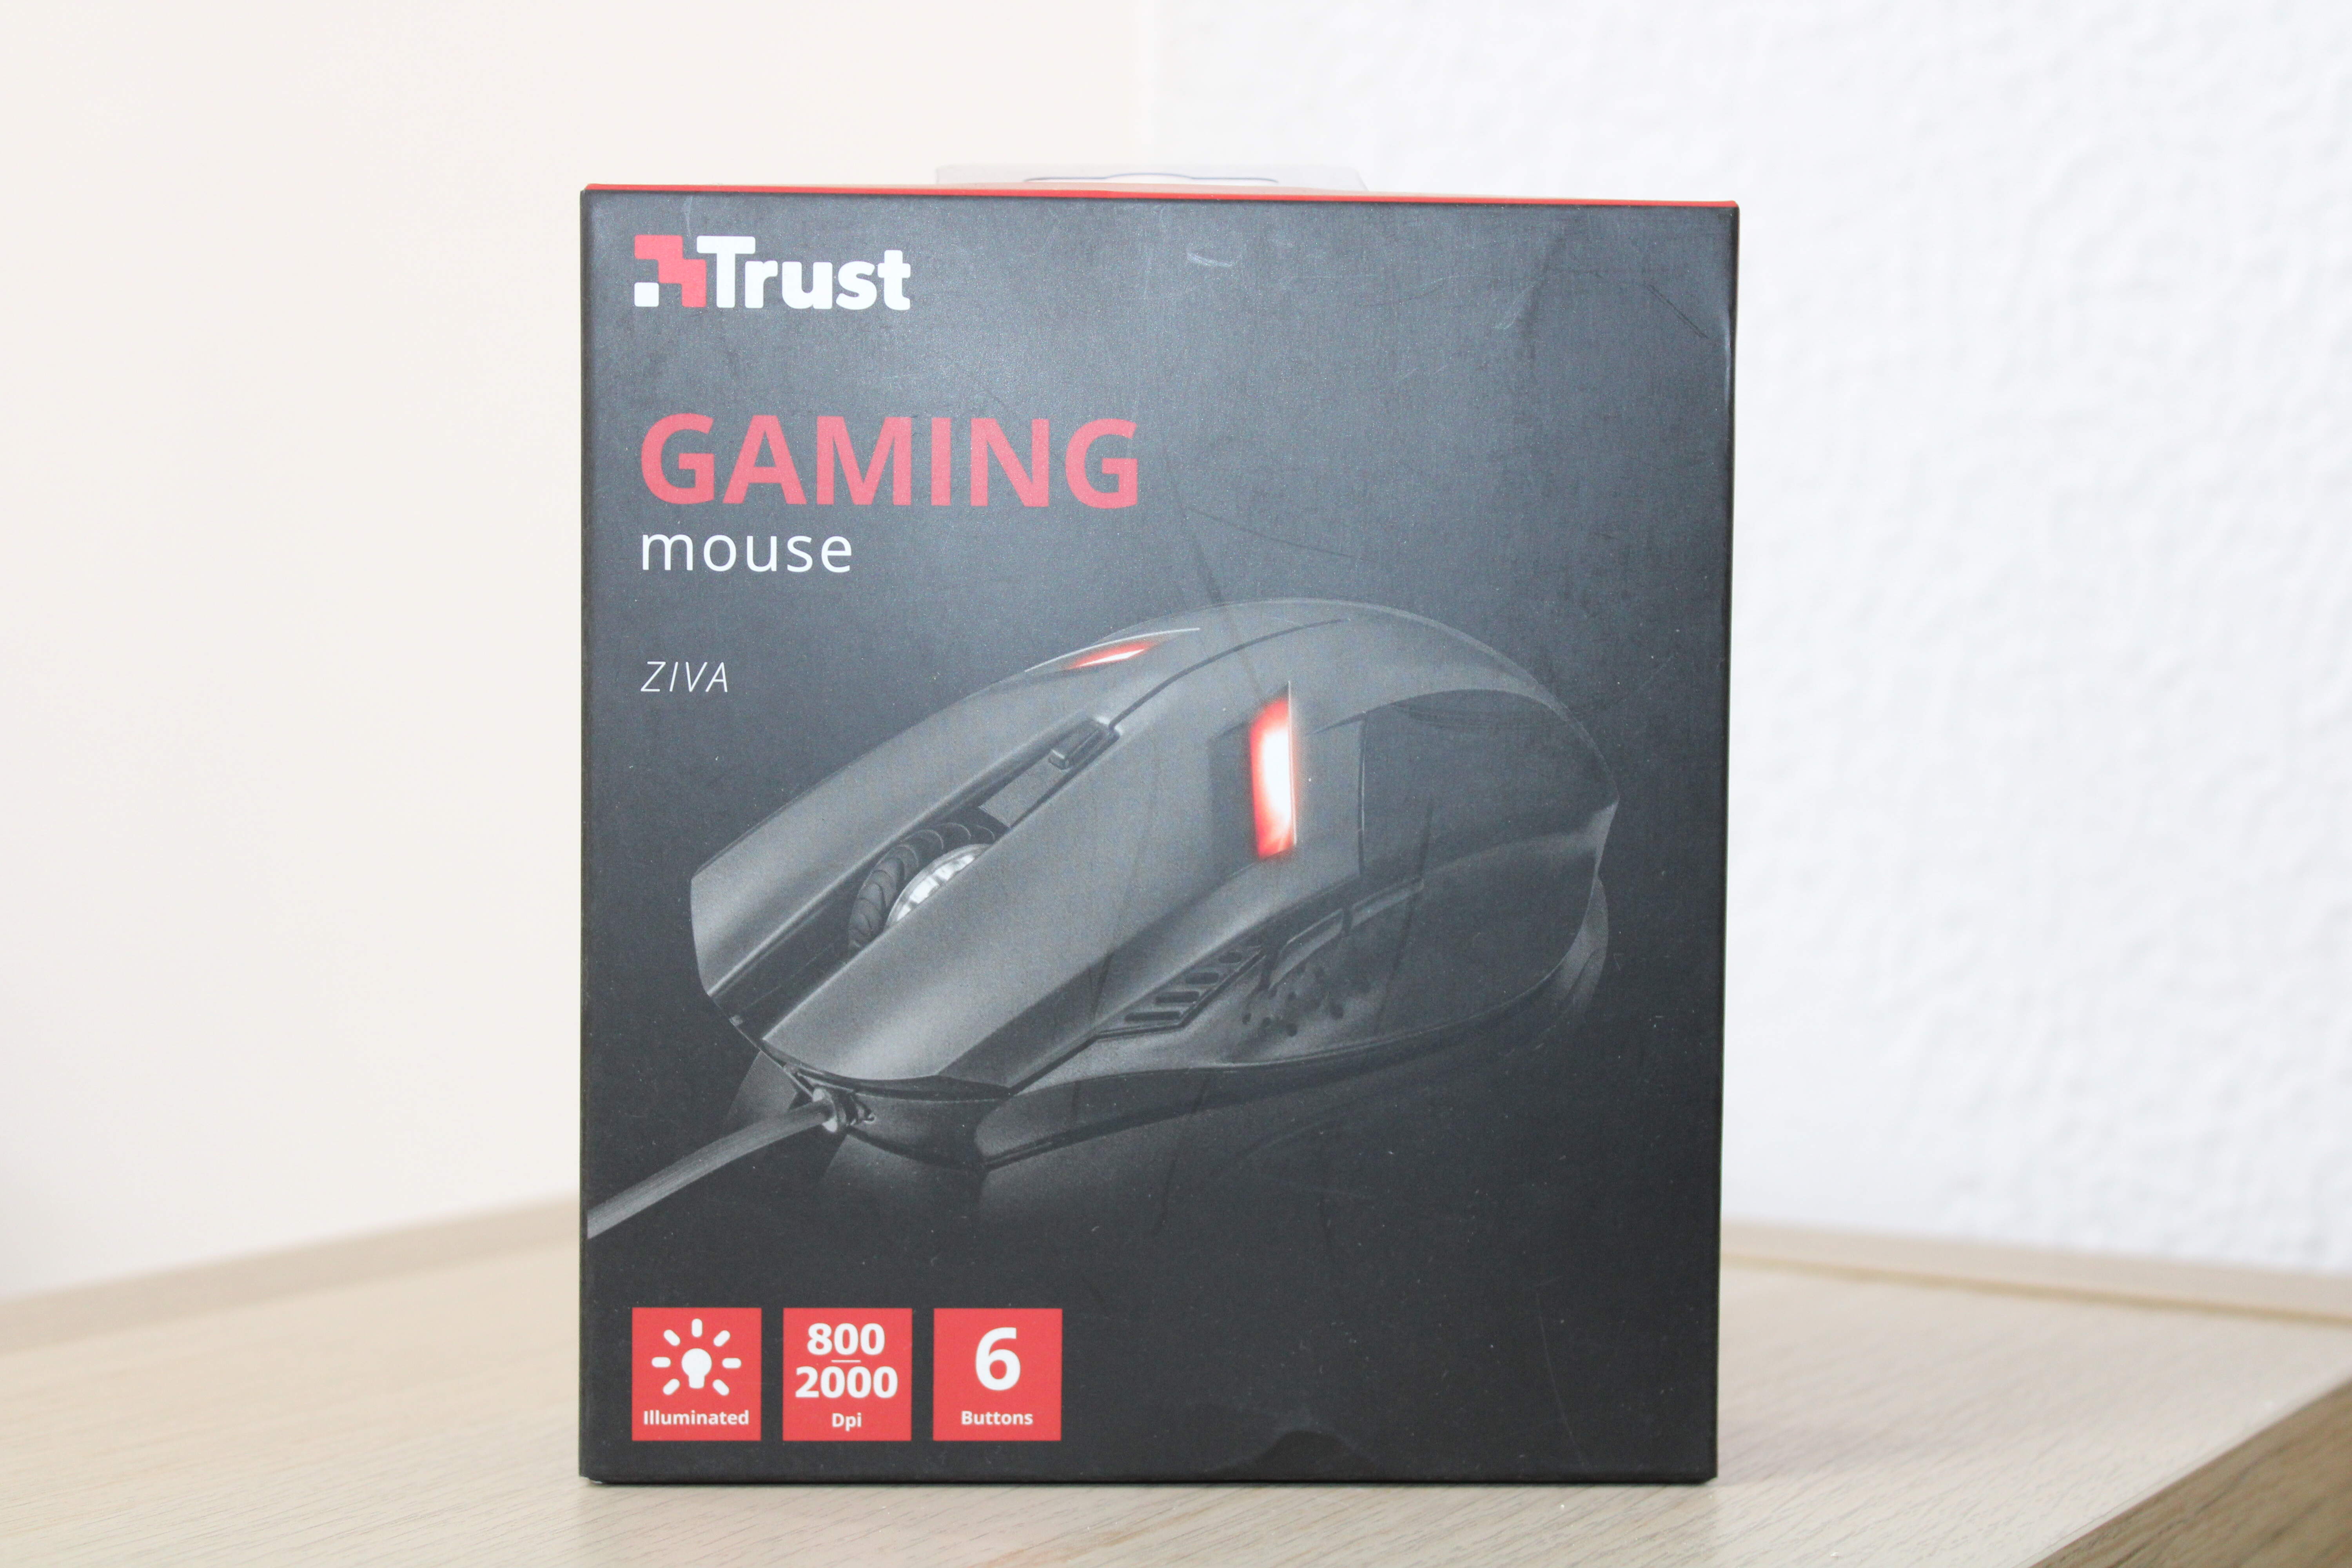 GAMING MOUSE TRUST